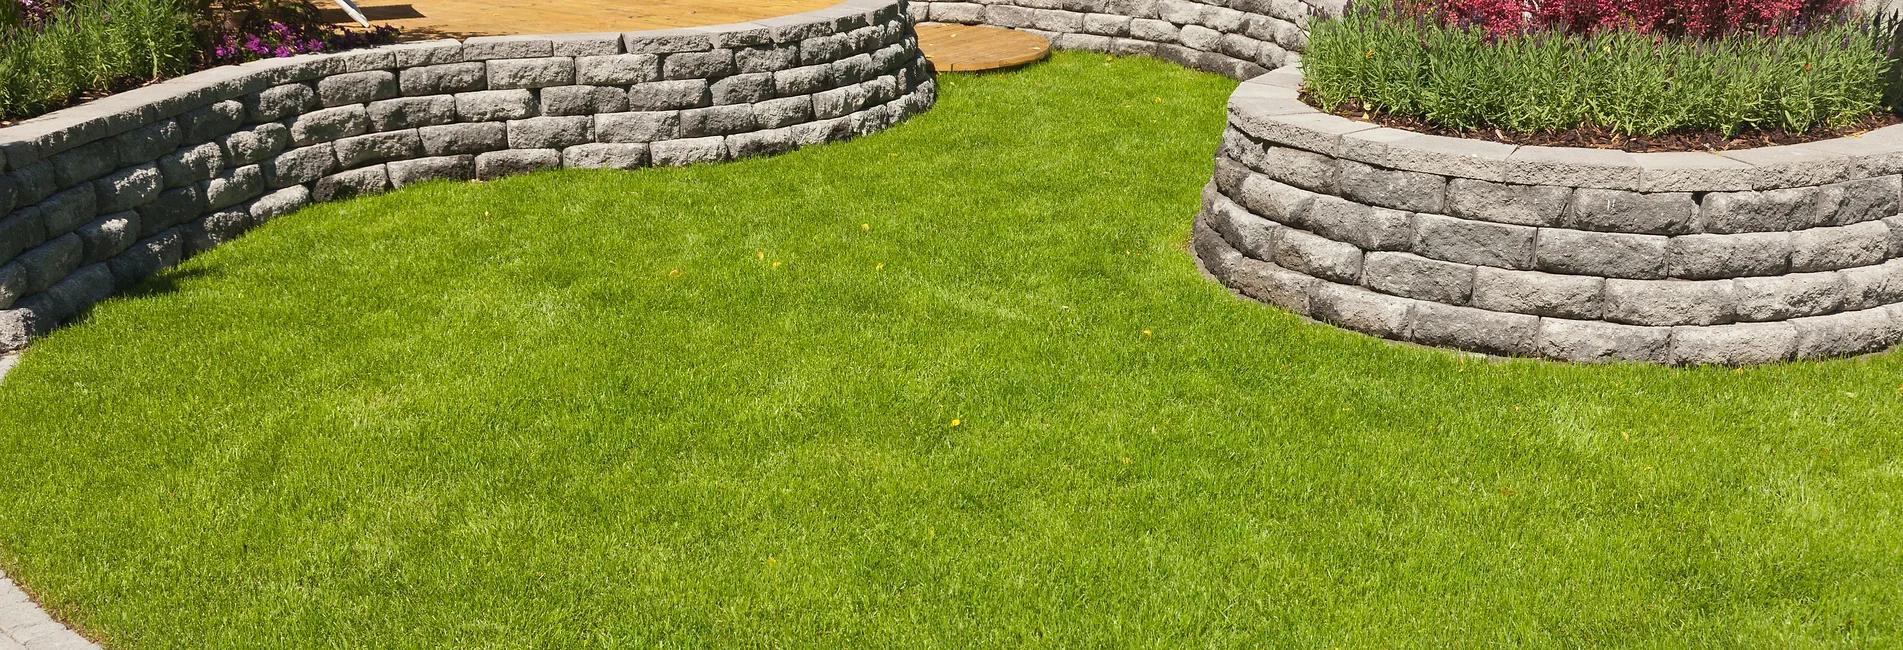 a grass field with a stone wall